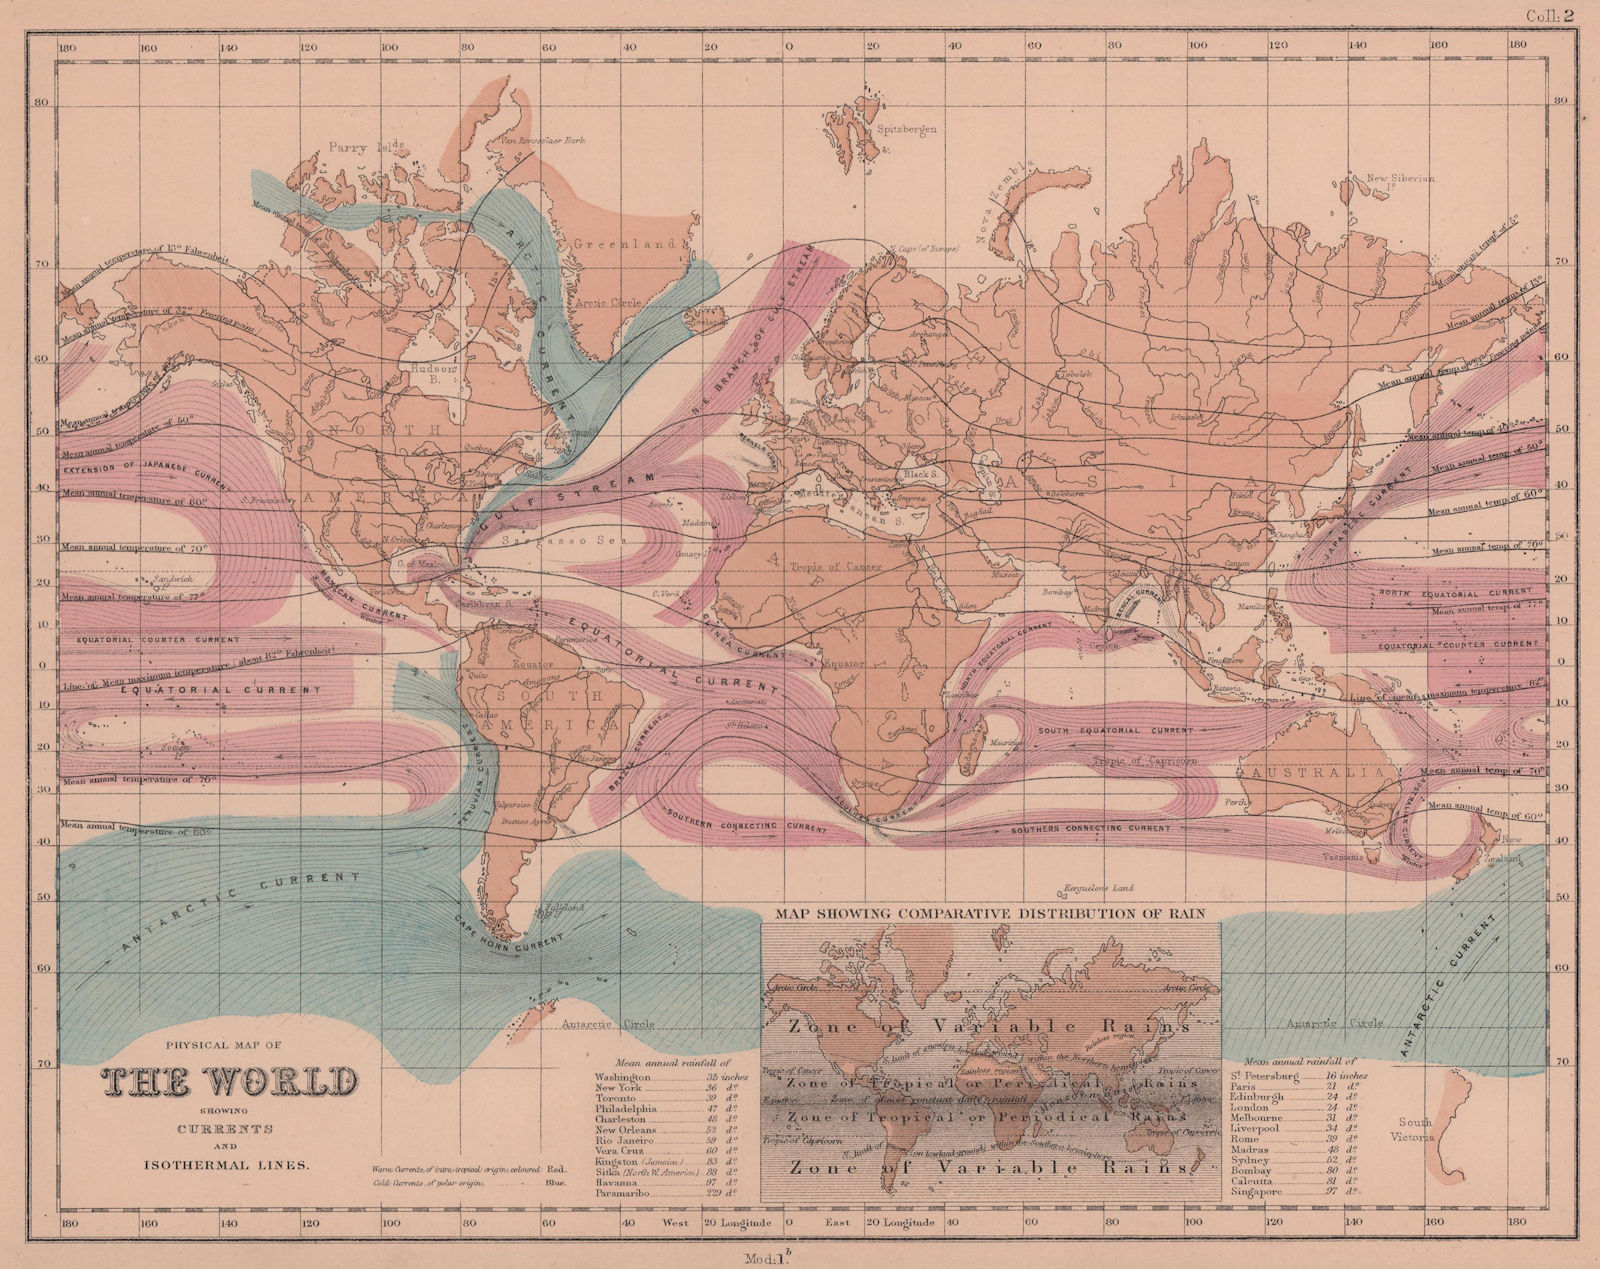 Associate Product Physical Map of the World. Ocean currents & isothermal Lines. HUGHES 1876